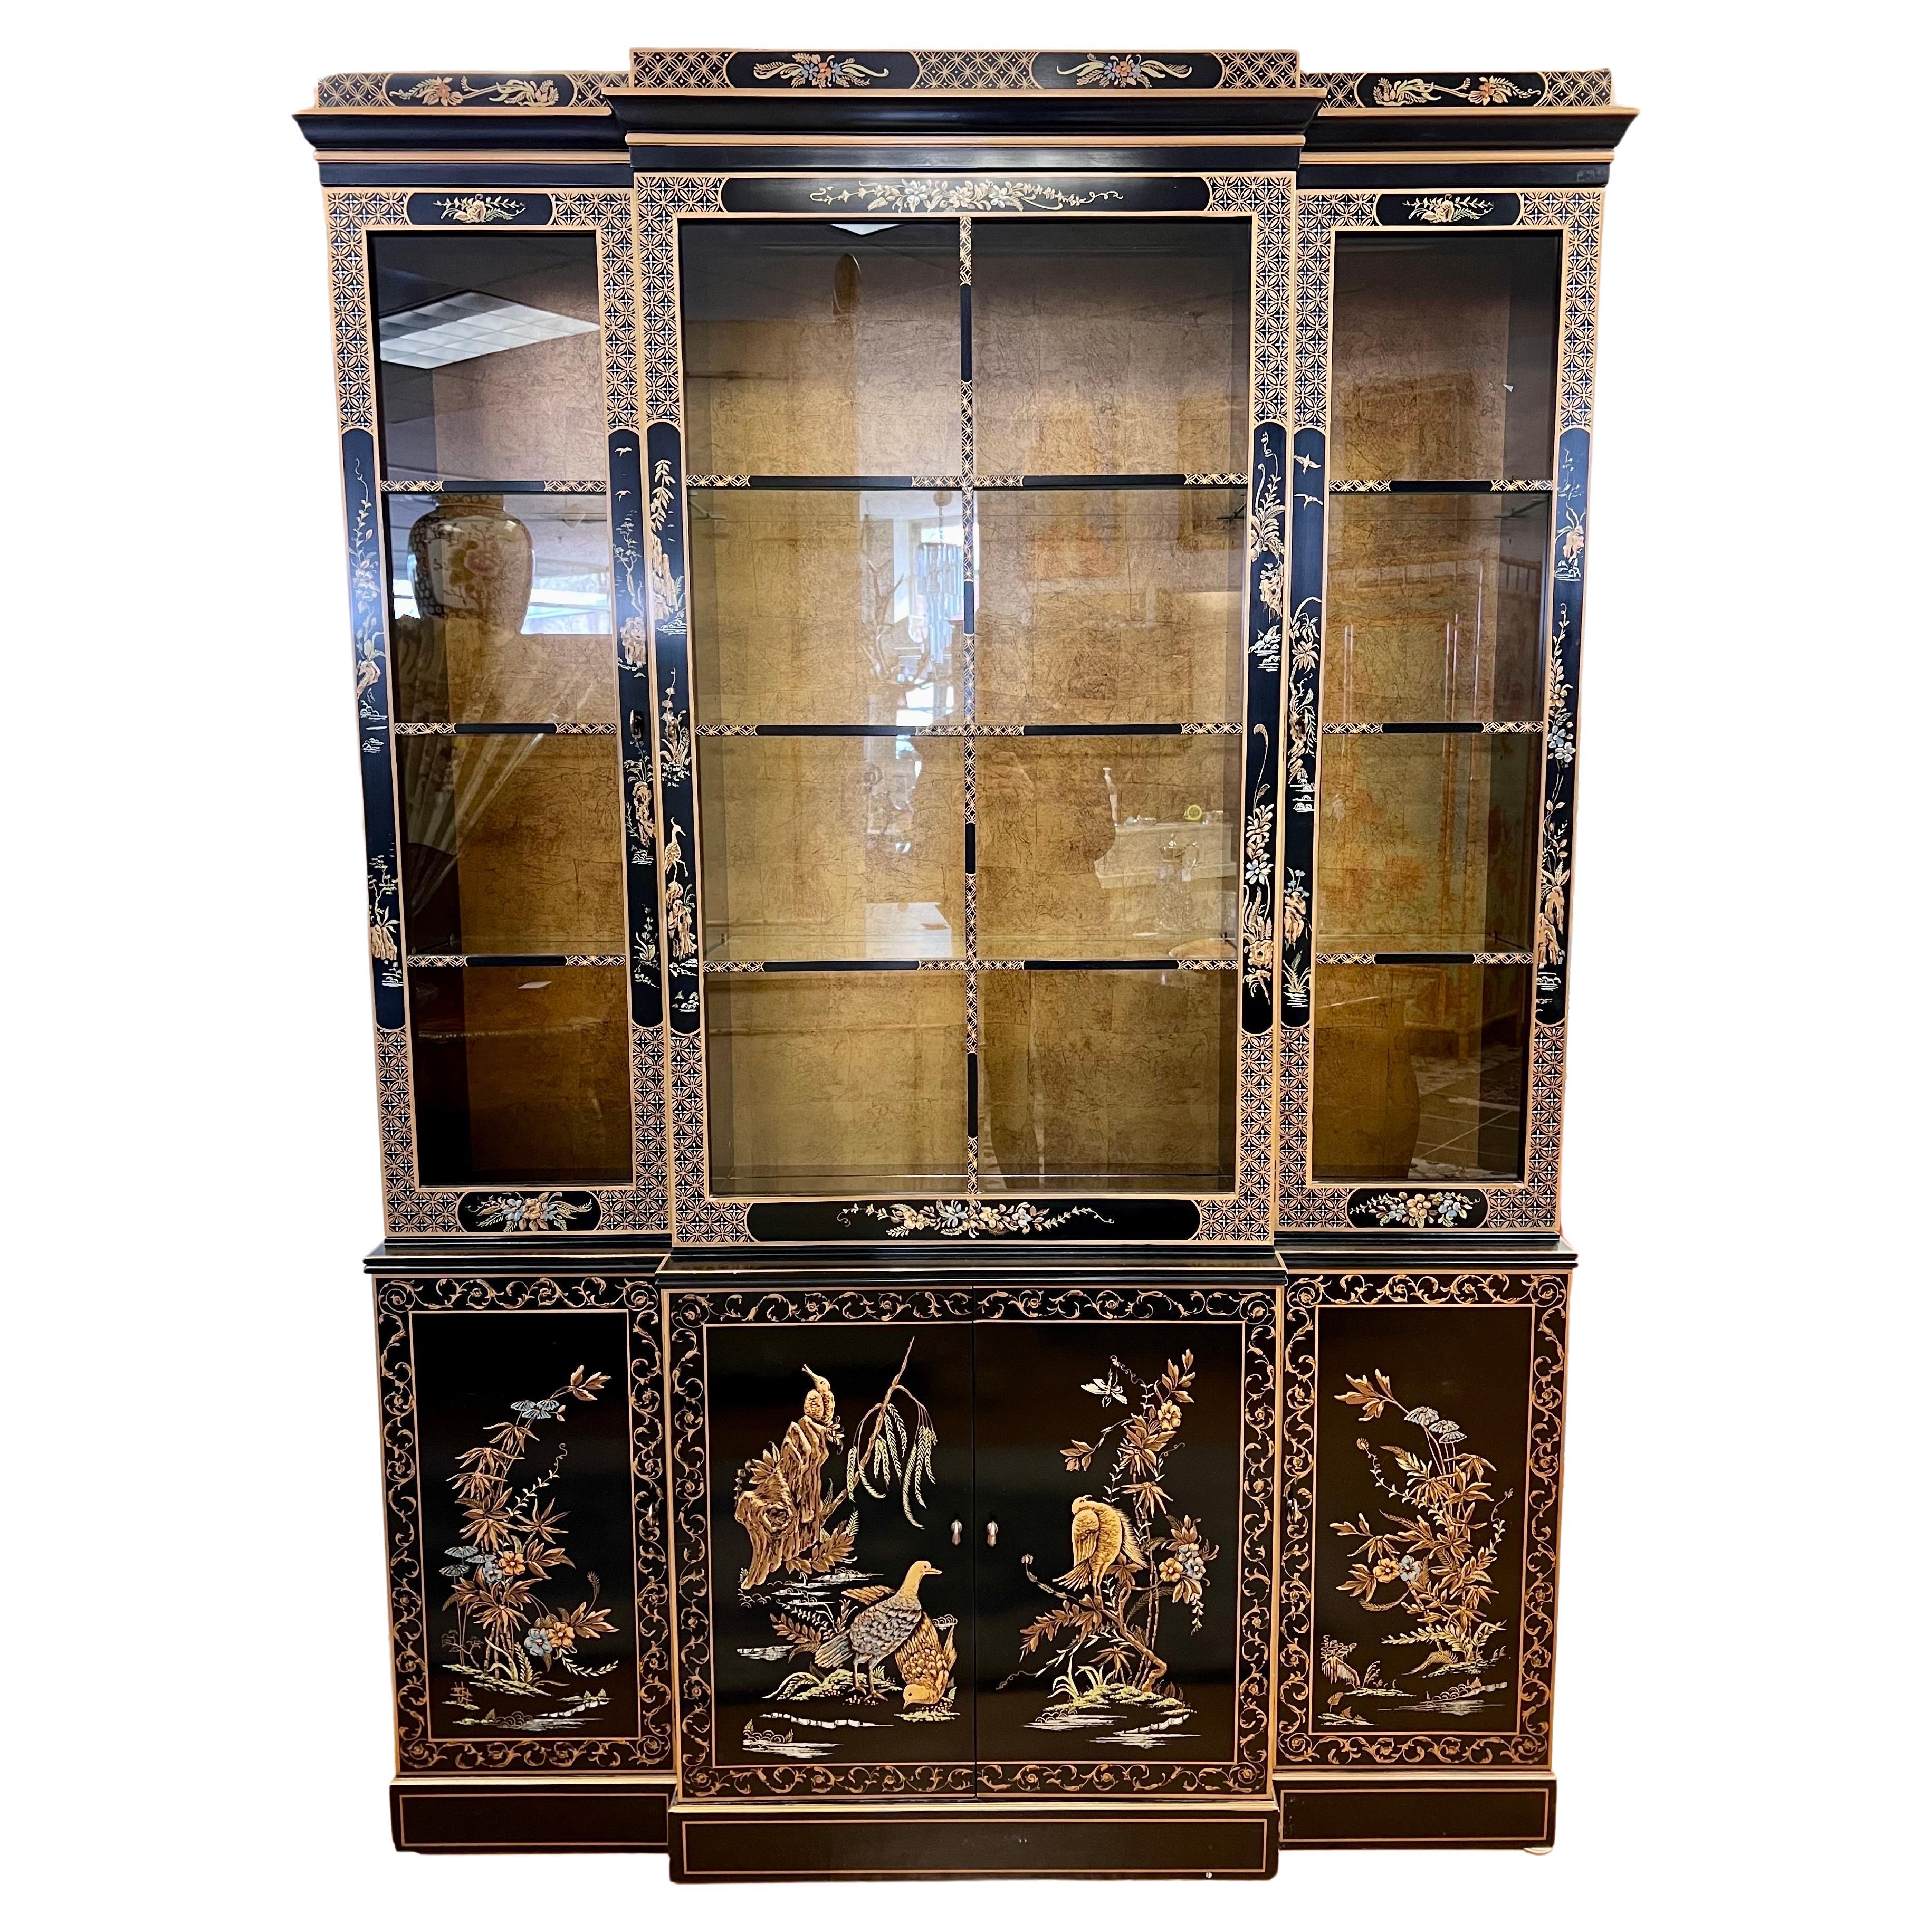 Drexel Heritage Chinoiserie Black Lacquer Breakfront China Cabinet Sideboard